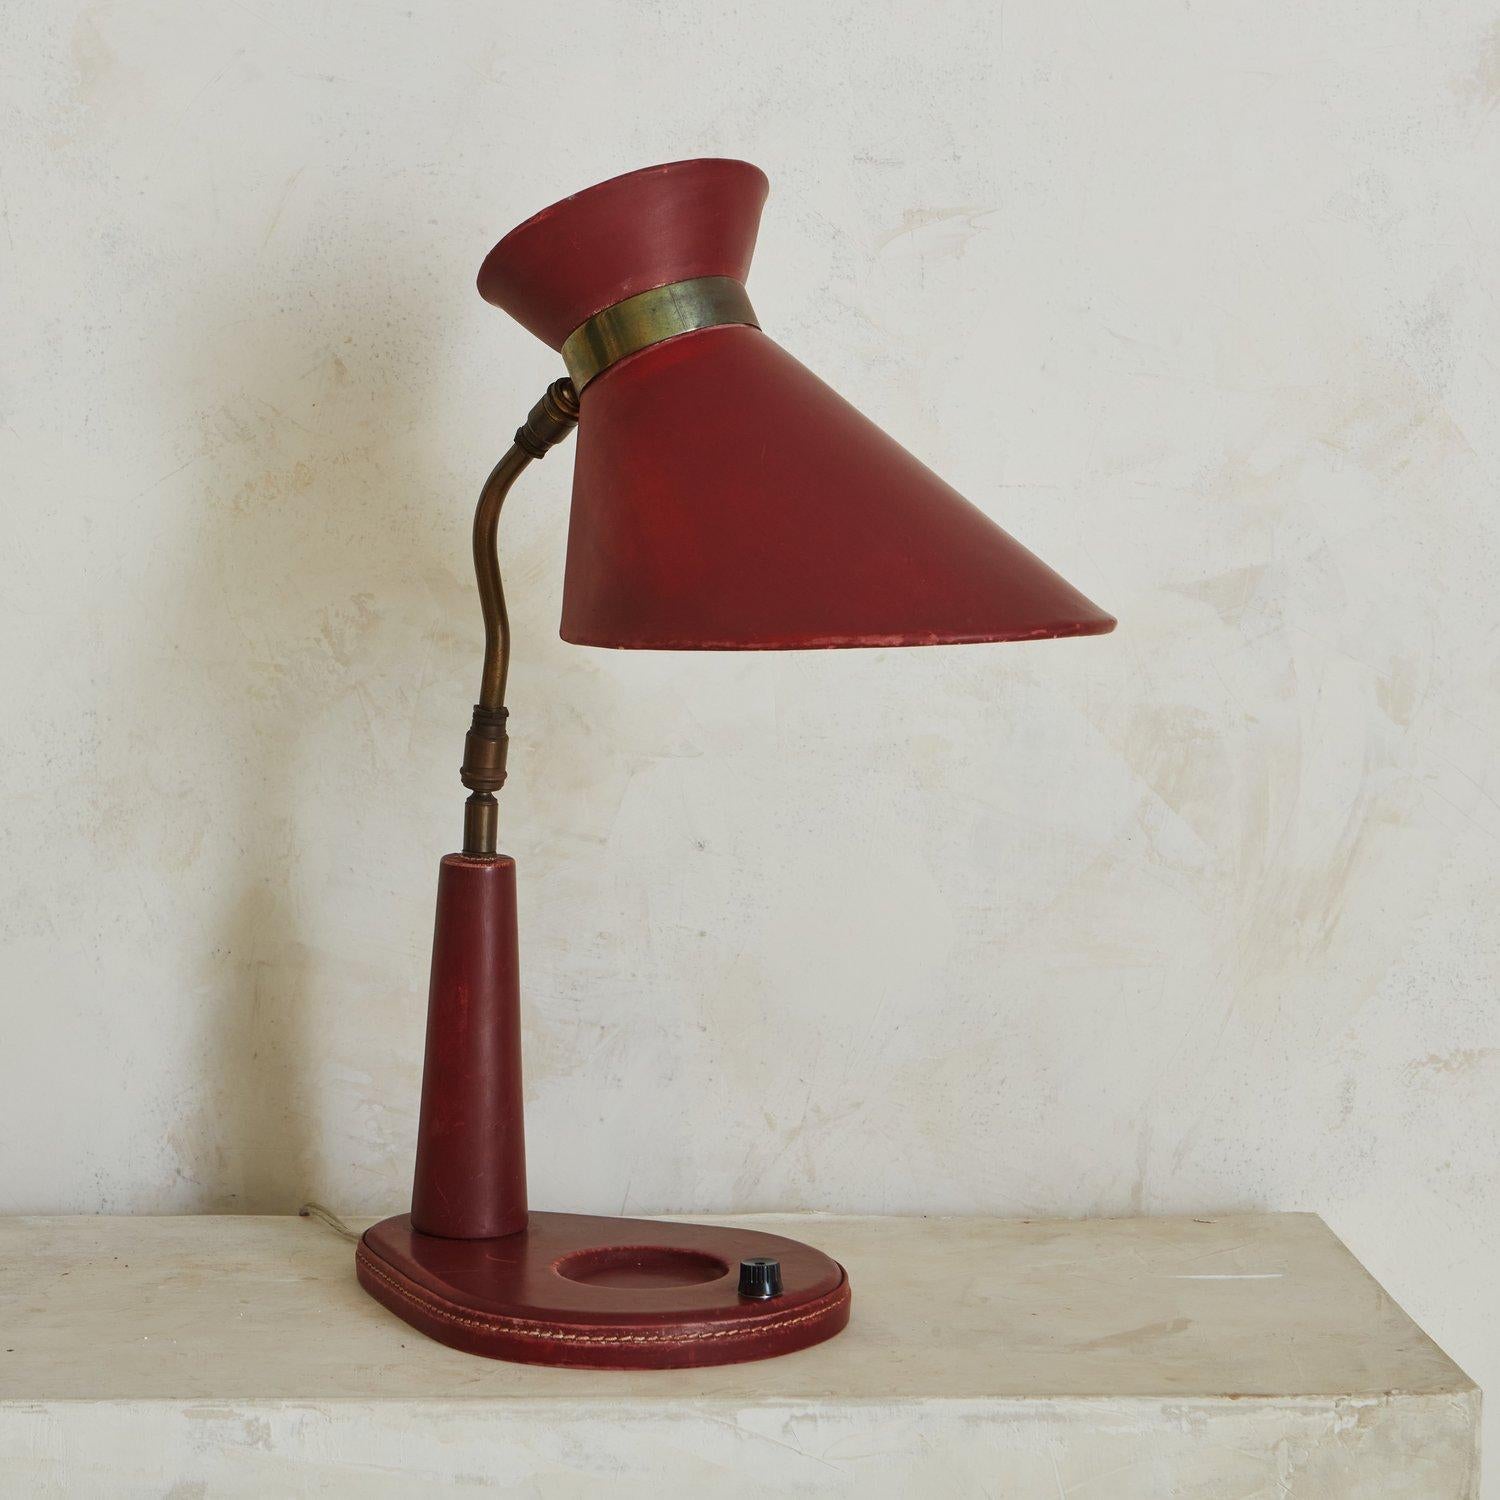 A 1950s desk lamp in the style of Jacques Adnet. This lamp has a shade and body clad in red leather with stitch detailing. It has a curved, adjustable brass stem with a beautiful patina. This lamp has a circular catchall detail on the base next to a